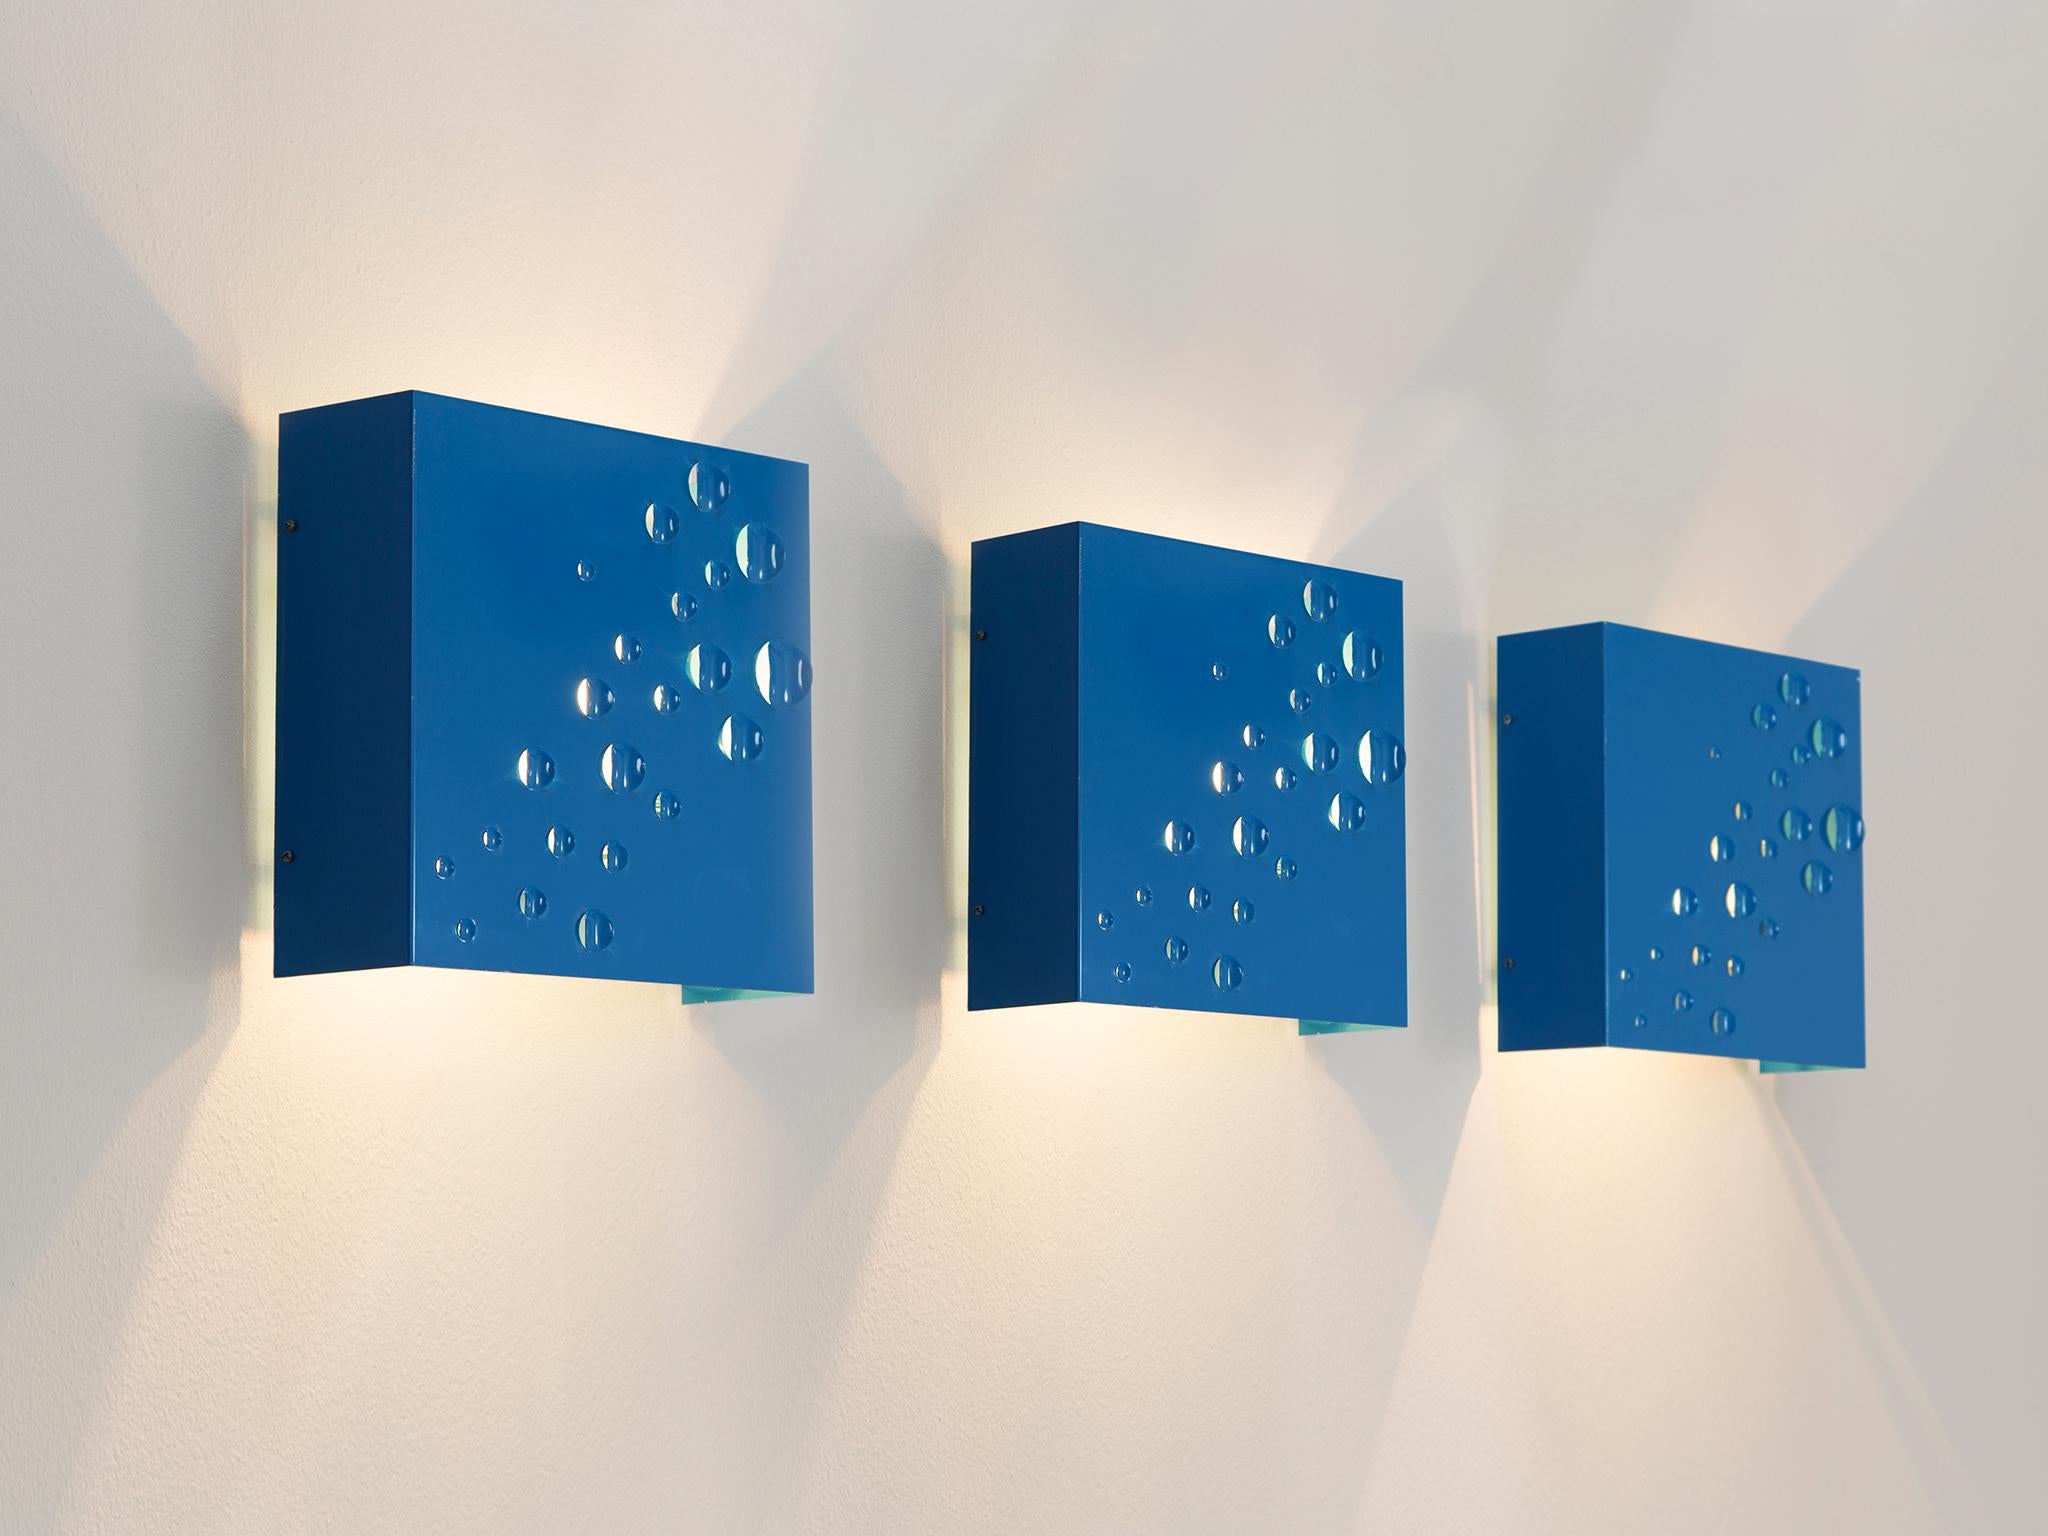 Evert Jelle Jelles for RAAK Amsterdam, Sterrenregen (Rain of Stars) wall lights, in painted steel, Netherlands, 1965. 

These blue wall lamps have a basic design which presents raised up round flaps which let the light shine through creating a star